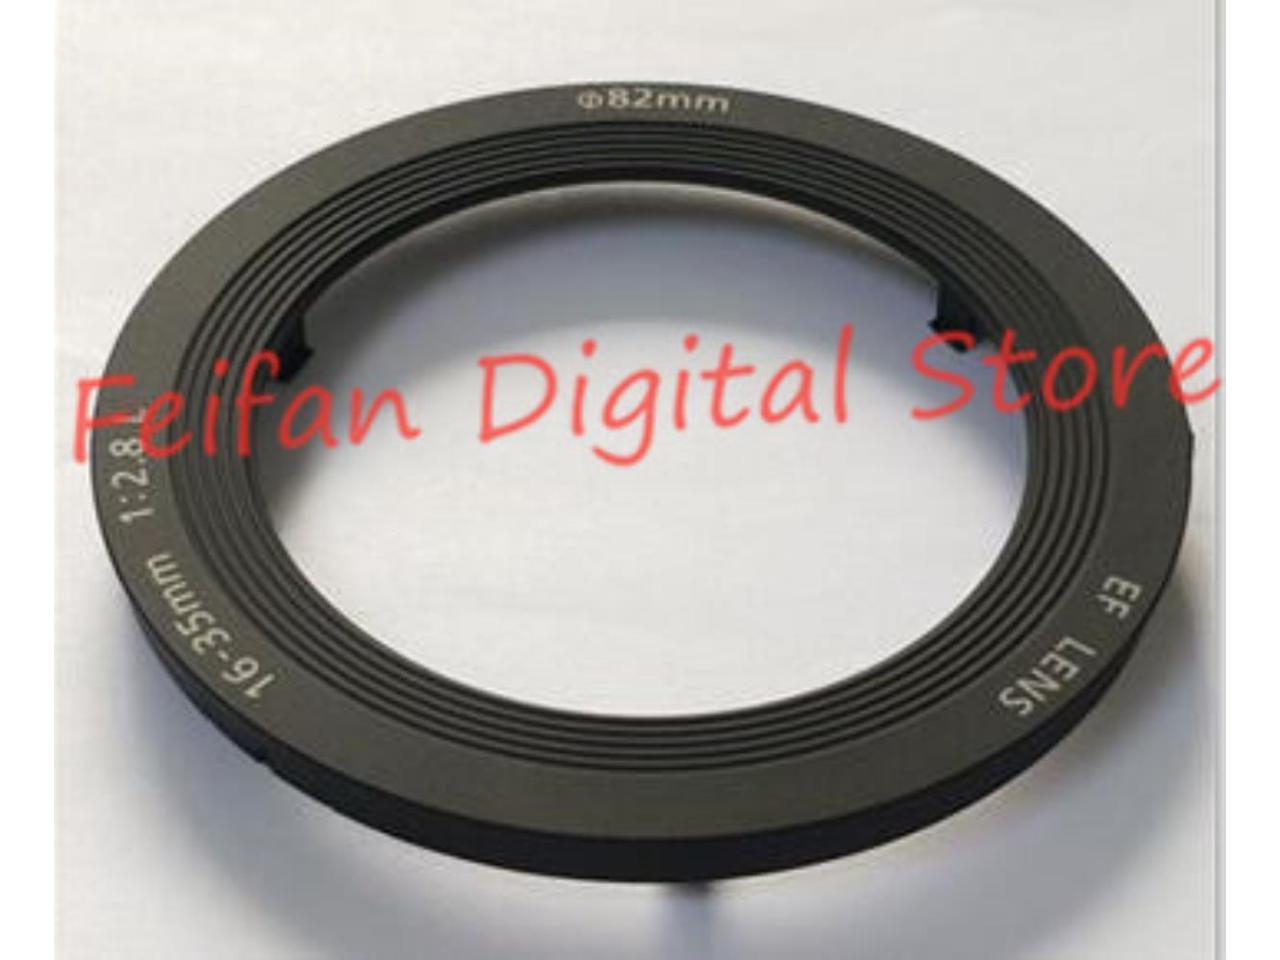 Front Name Ring Parts Canon EF 16-35mm F/2.8 L USM II Lens YB2-1305 mark 2 